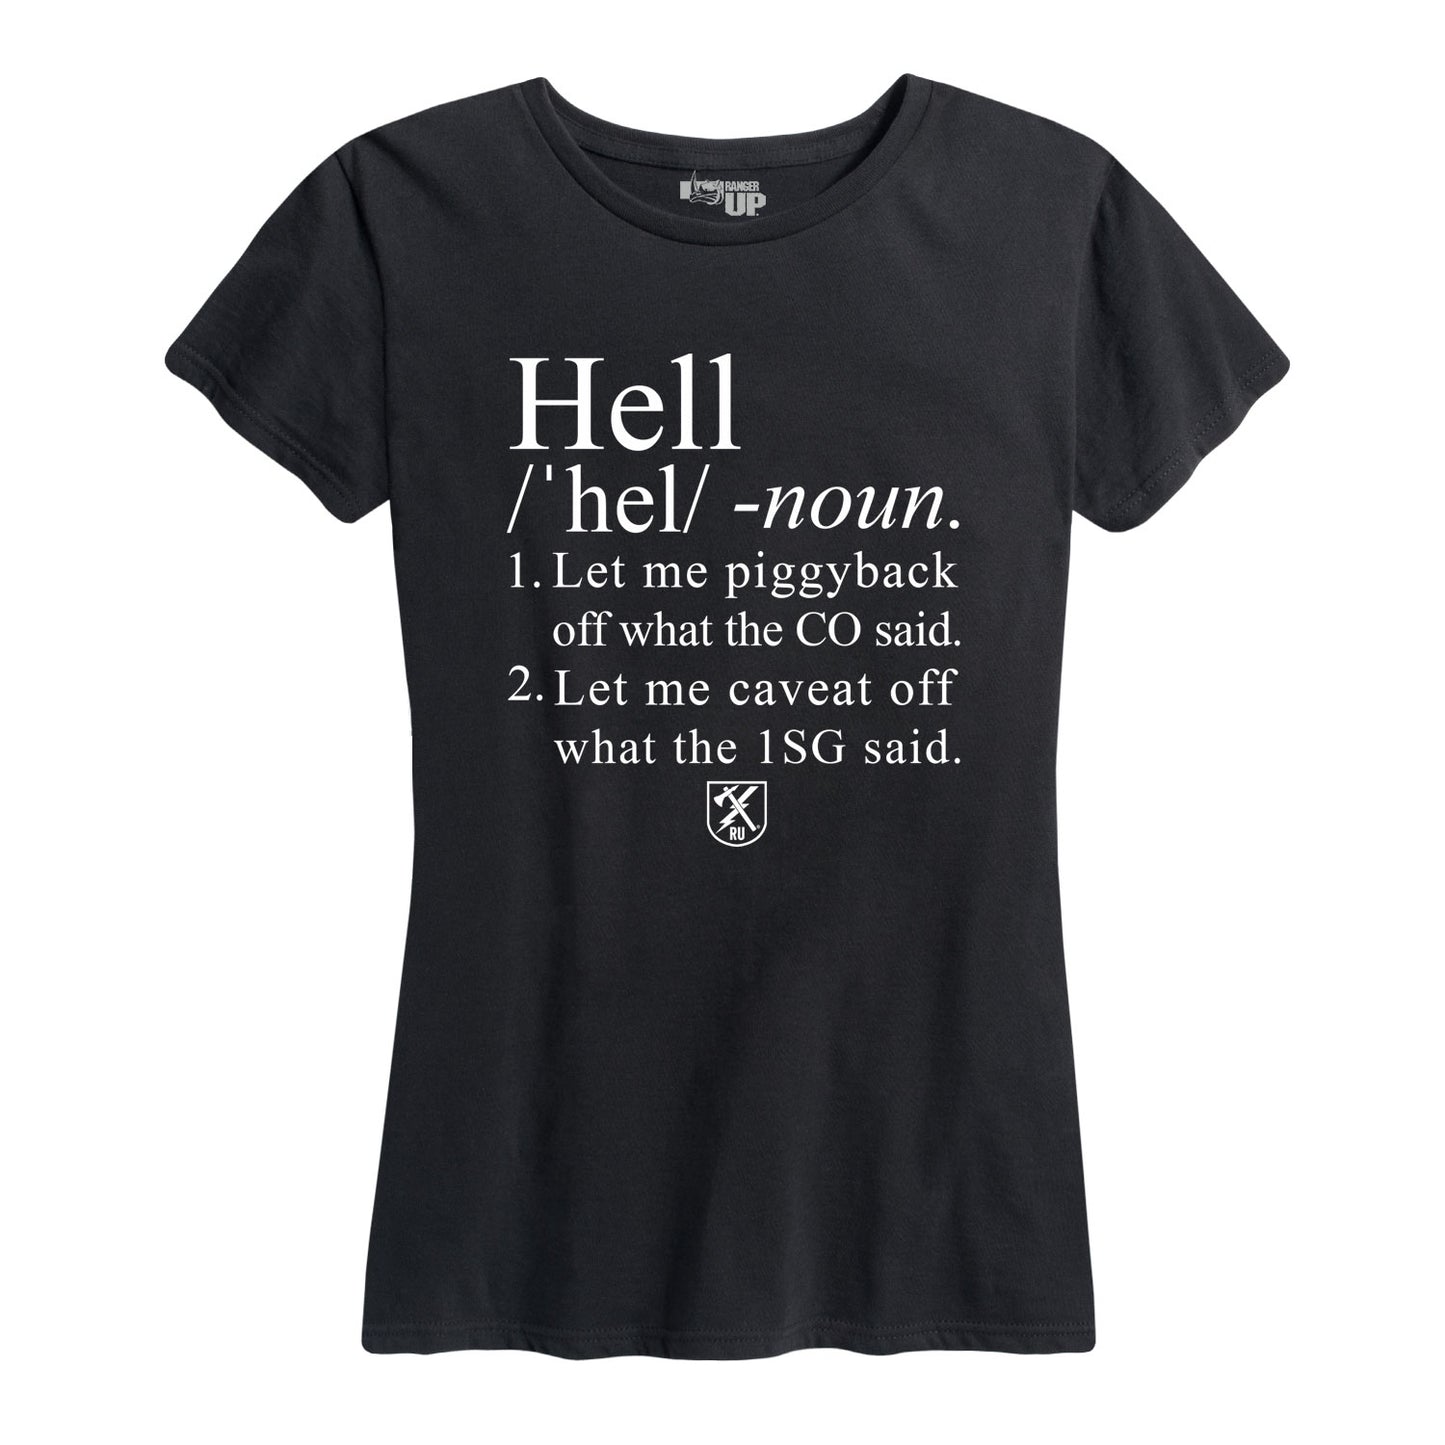 Women's Definition of Hell Tee